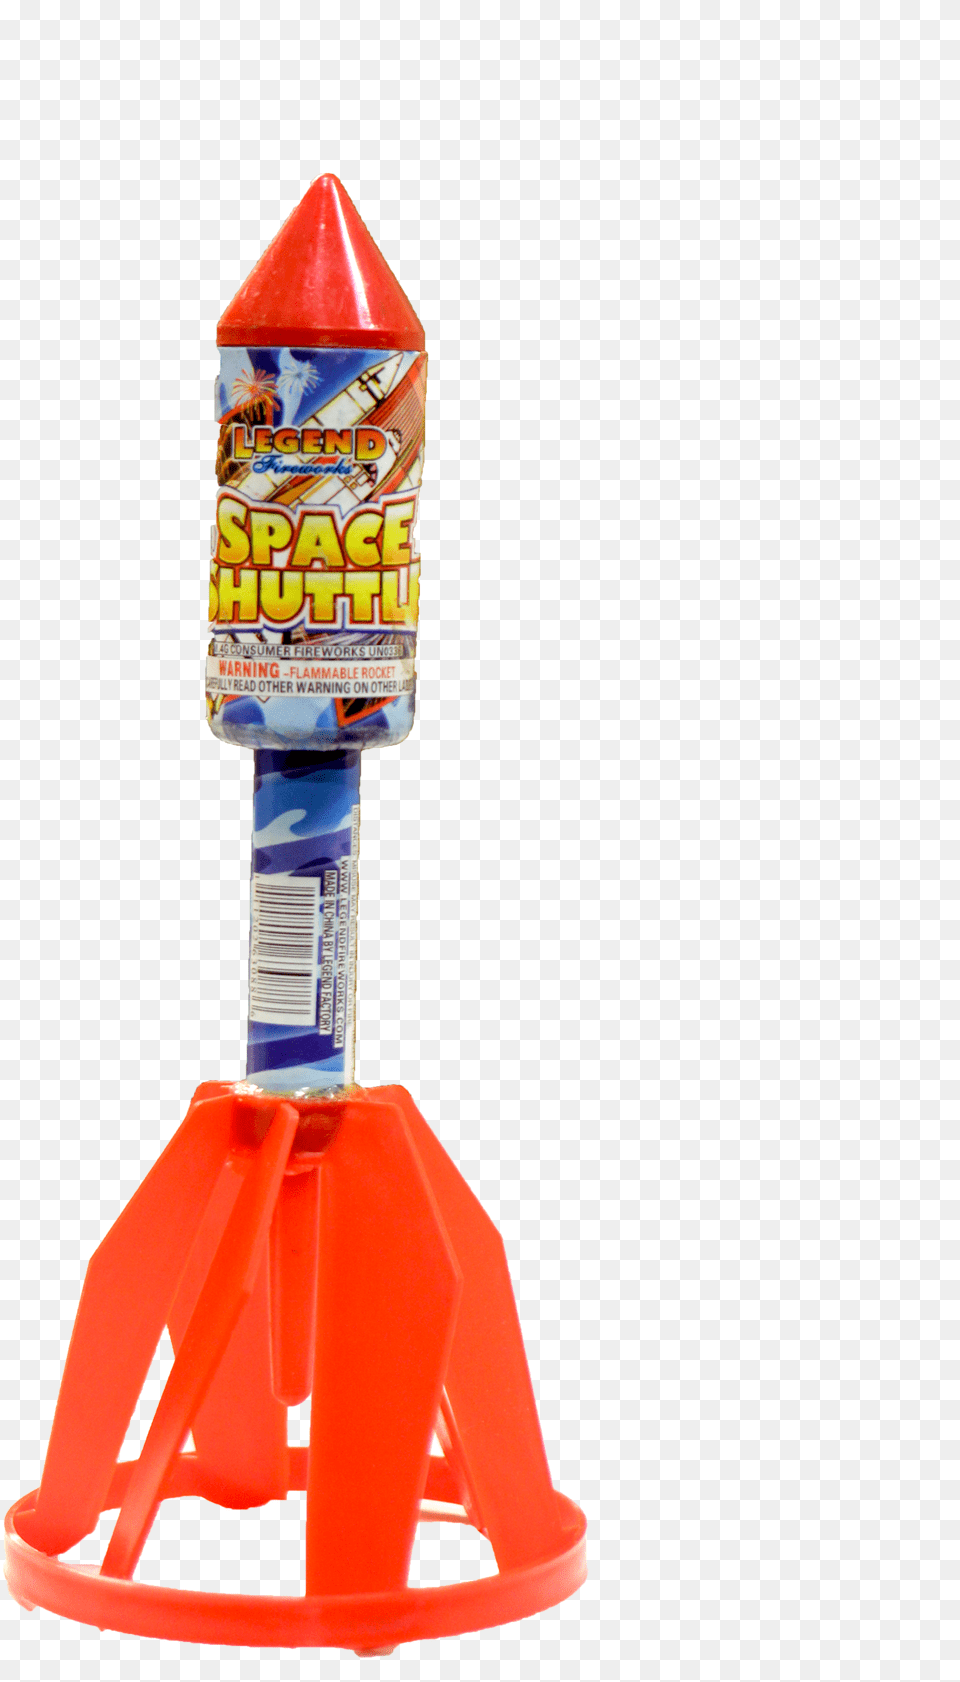 Space Shuttle Missile Space Shuttle Fireworks, Rocket, Weapon, Food, Sweets Free Transparent Png